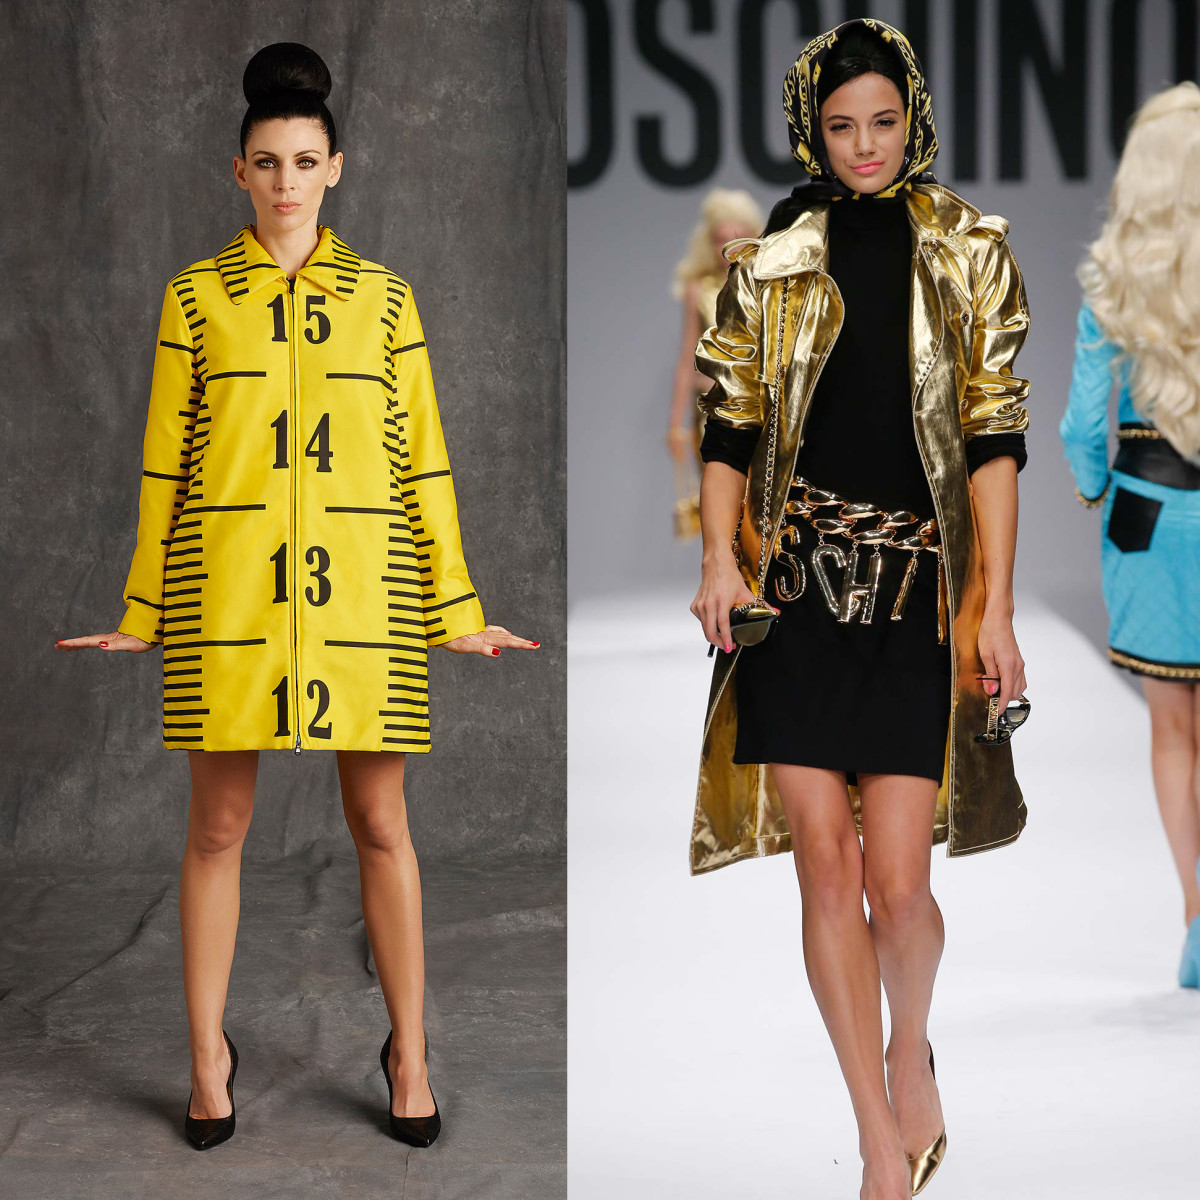 Moschino pre-fall 2015, left, and Moschino spring 2015, right. Photos: Moschino